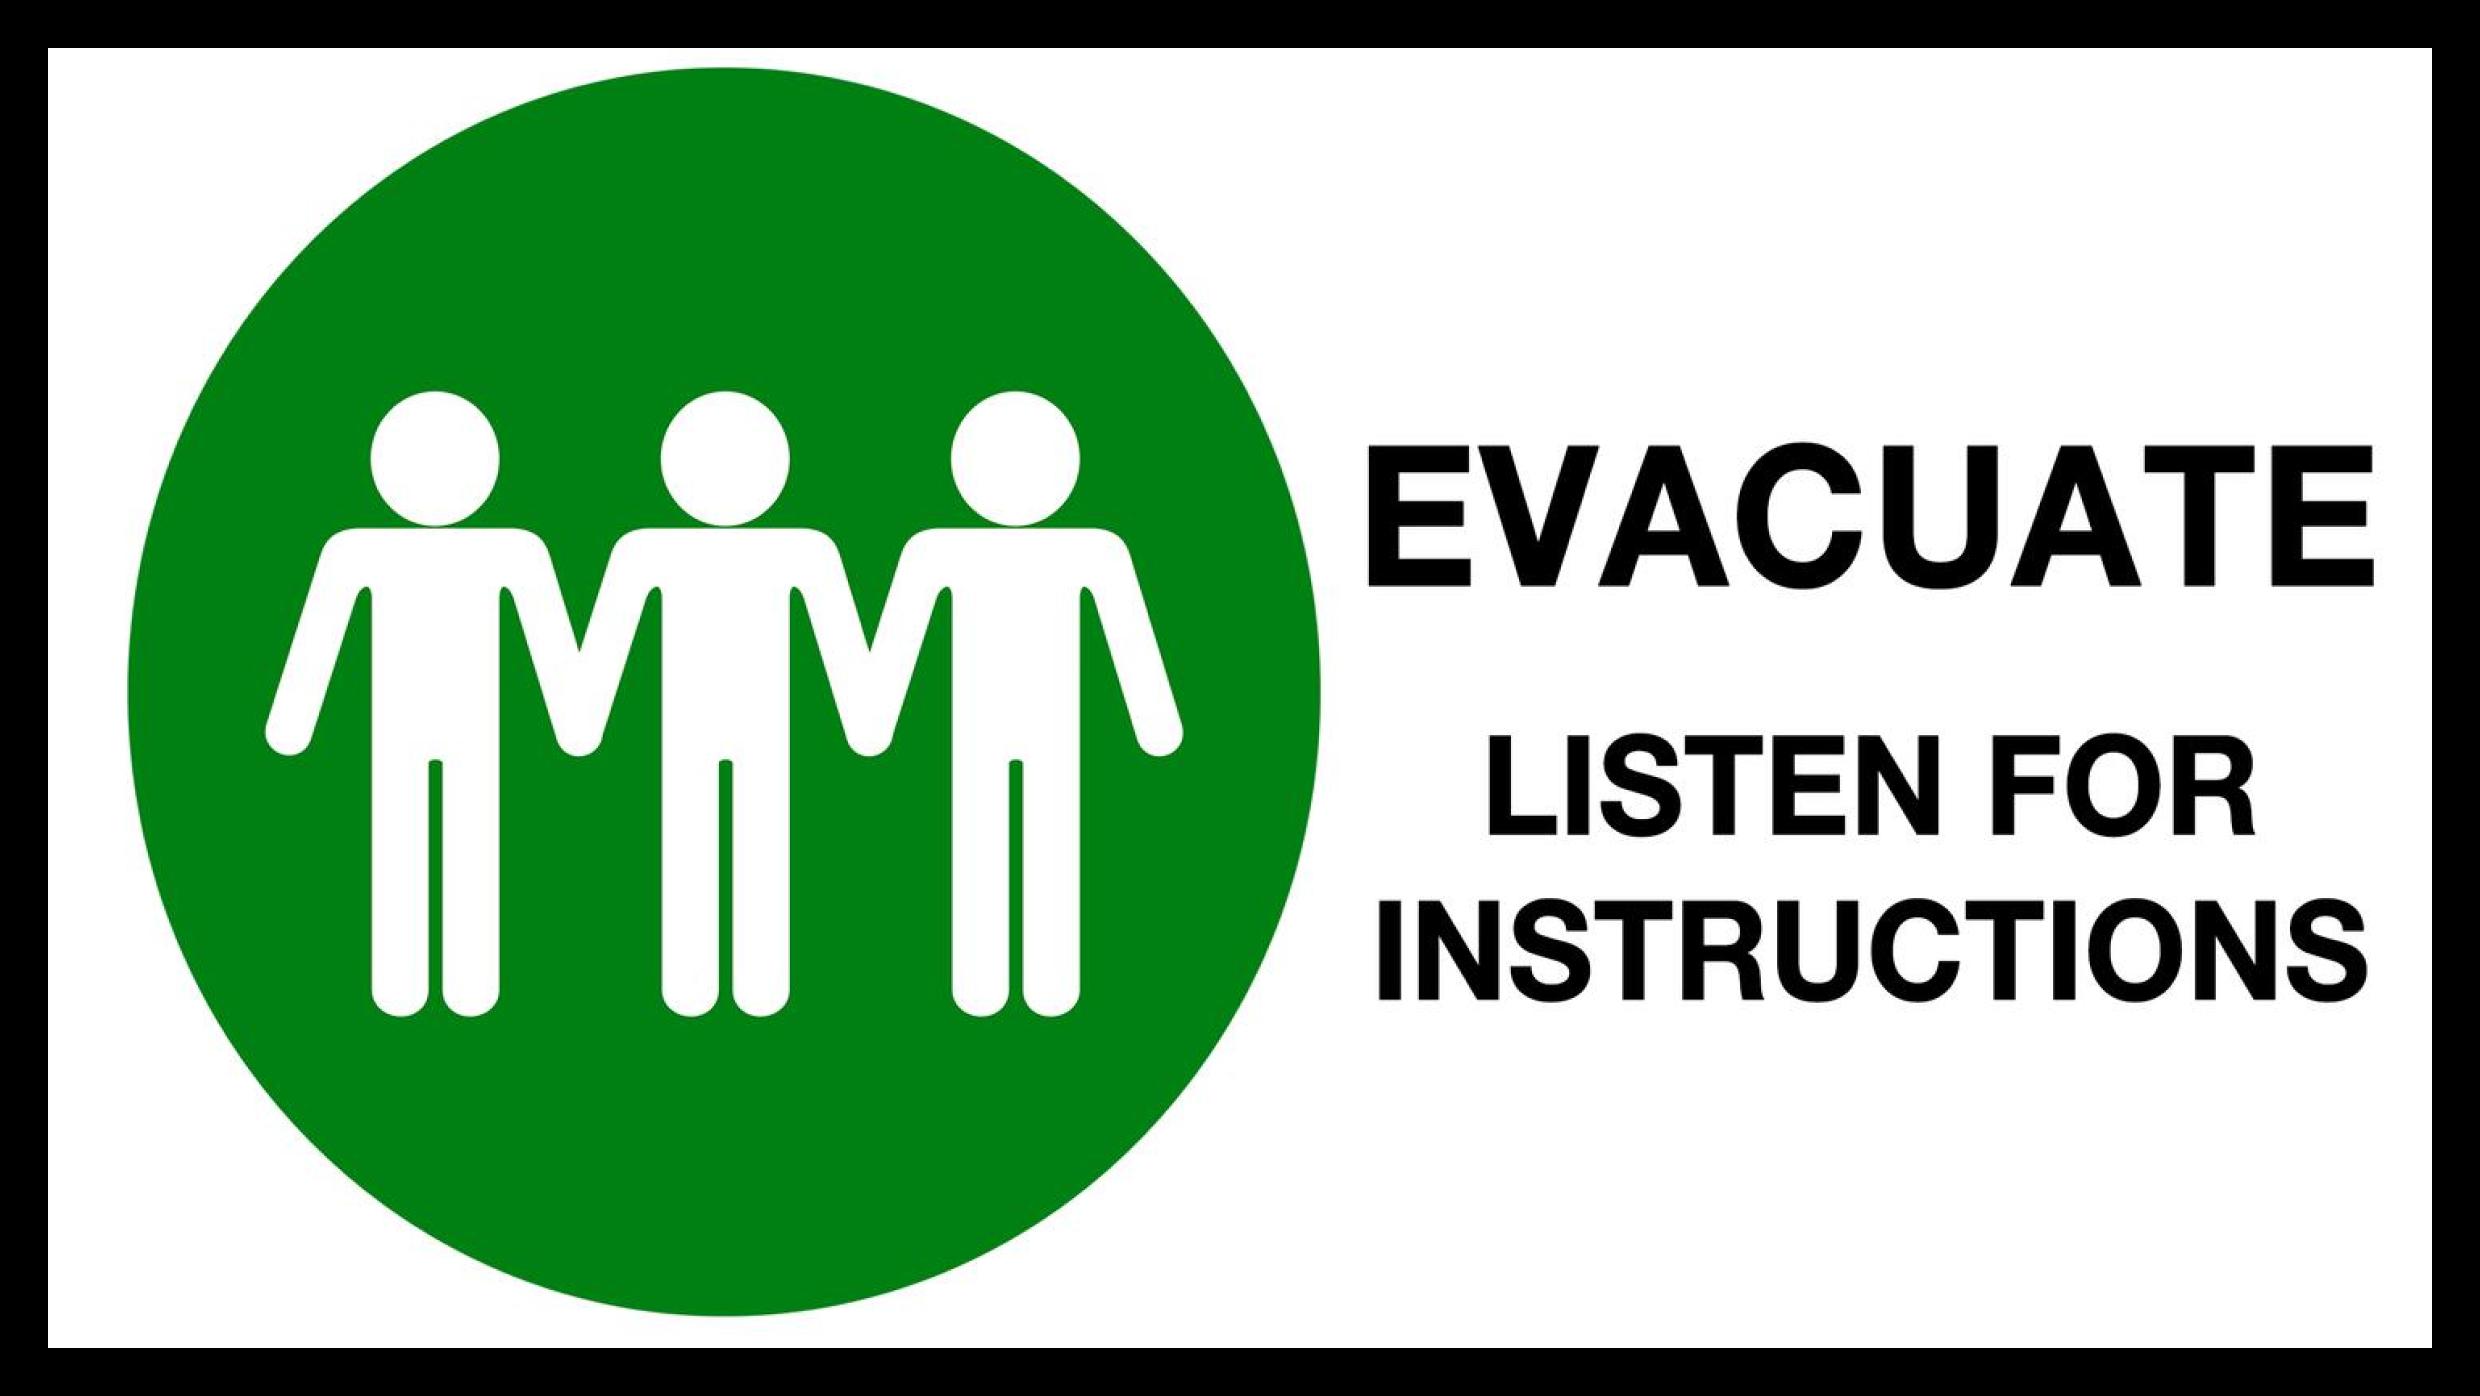 Screen example: Evacuate - listen for instructions